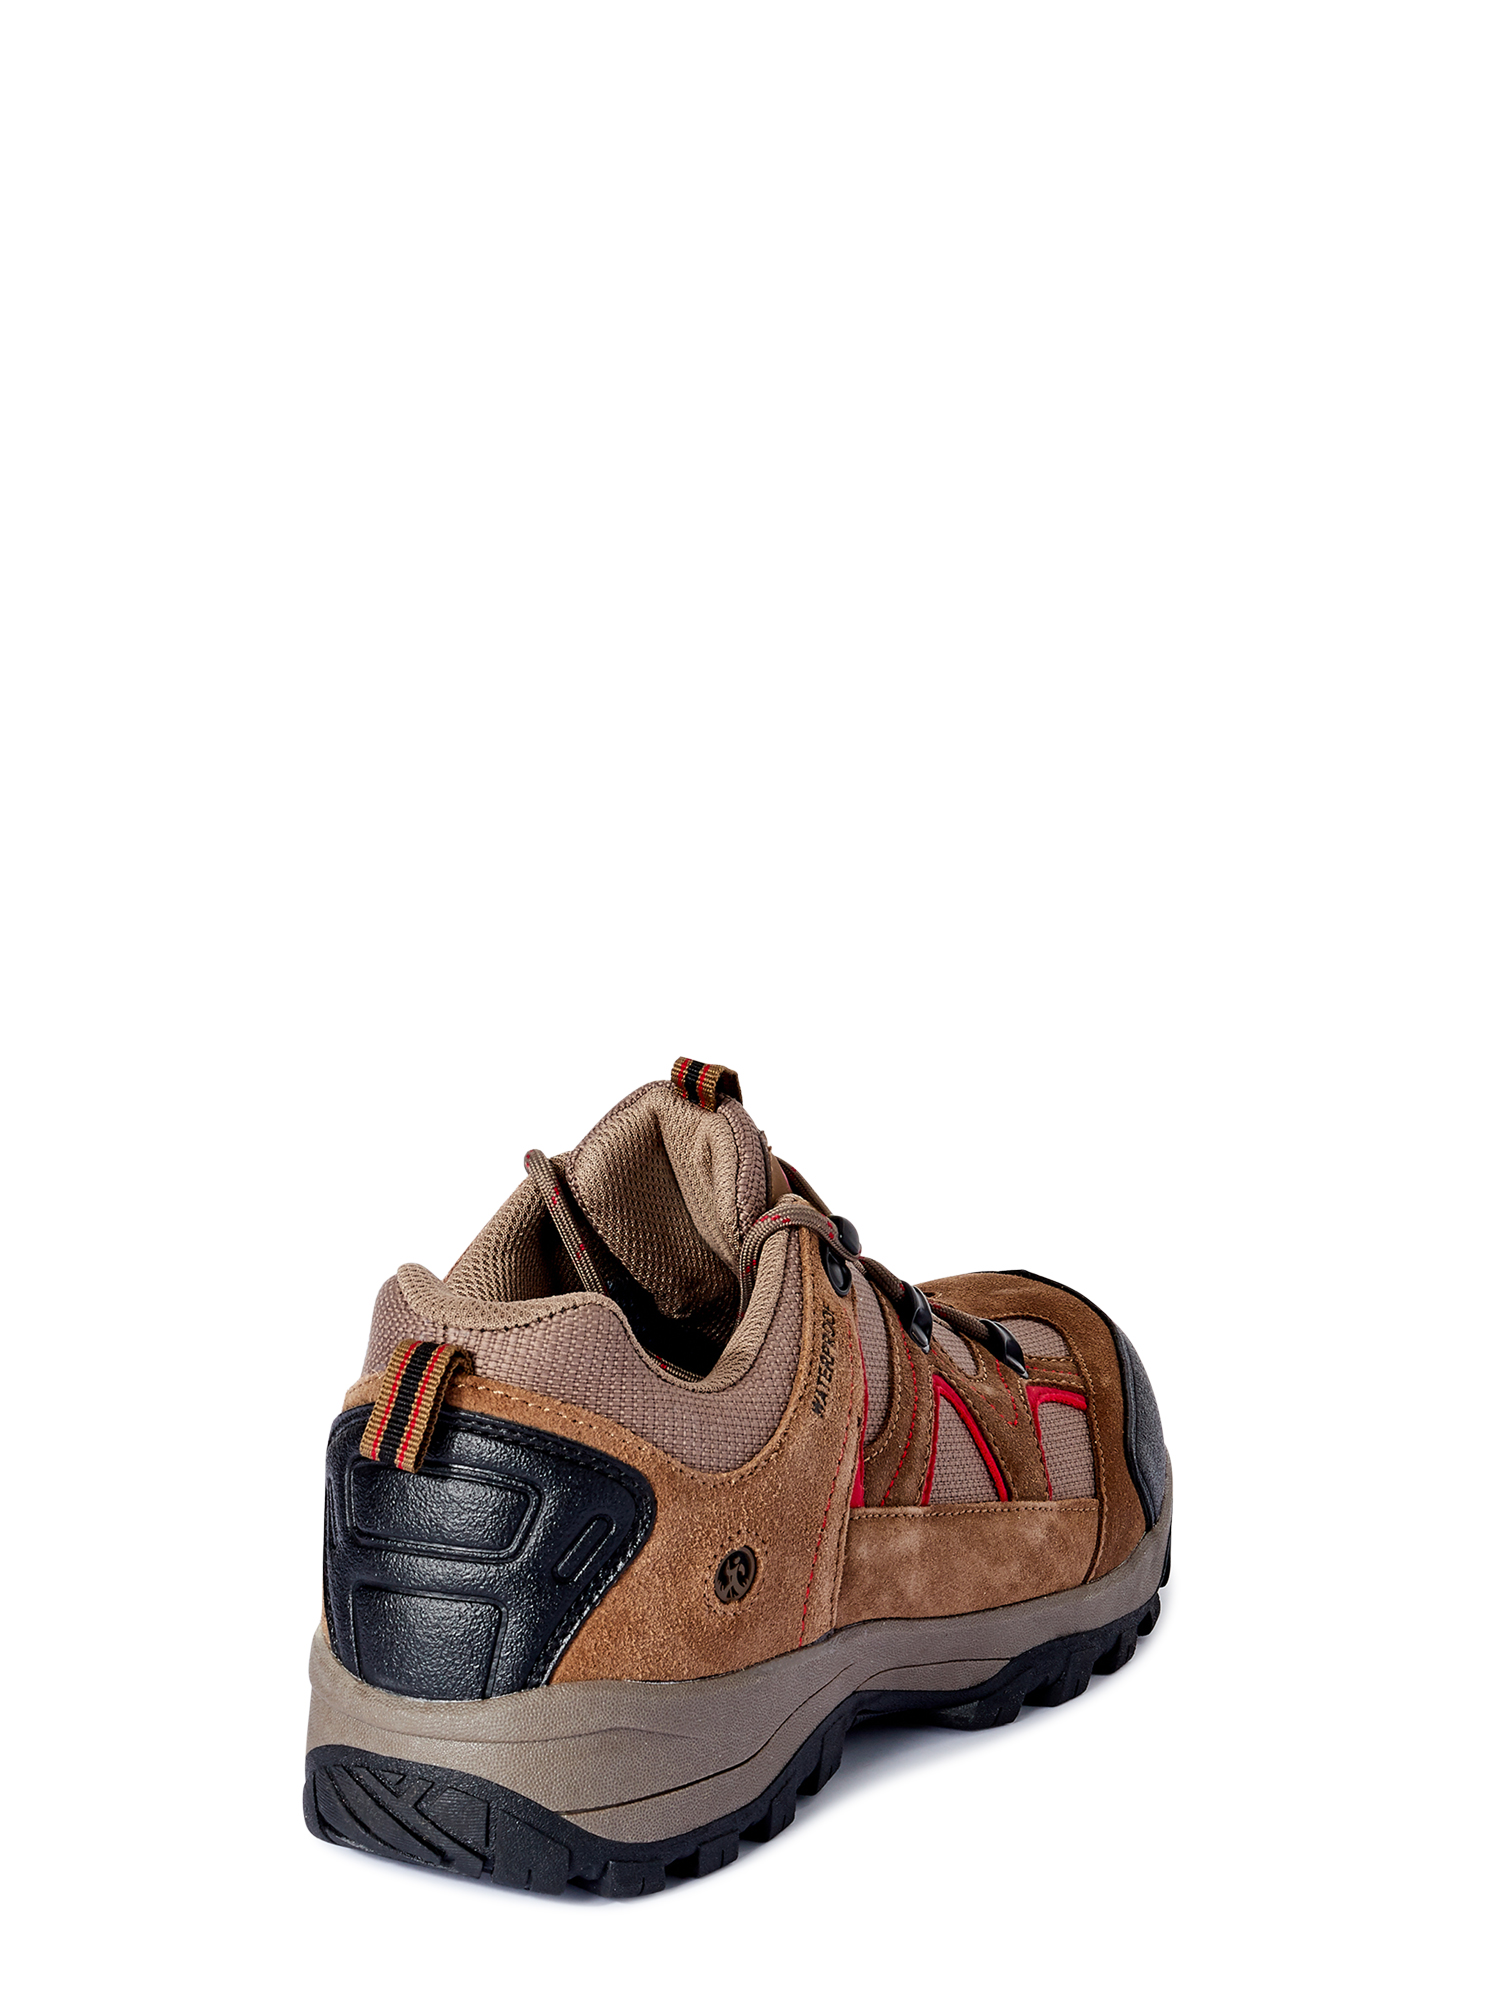 Northside Men's Snohomish Leather Water Resistant Hiking Shoe (Wide Available) - image 3 of 7